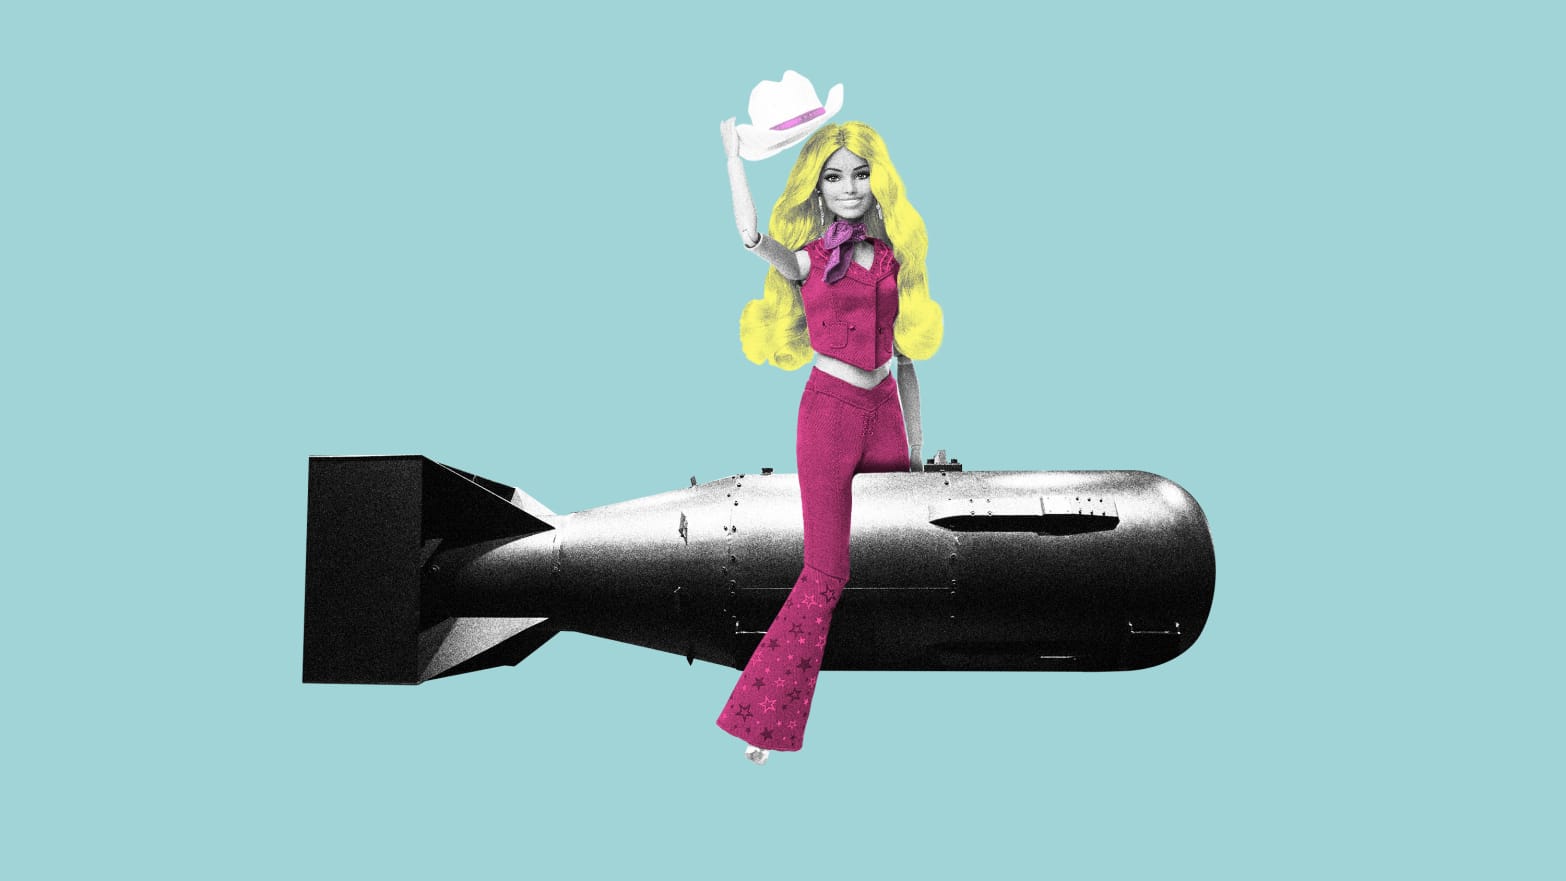 Photo illustration of Barbie riding an atomic bomb on a blue background